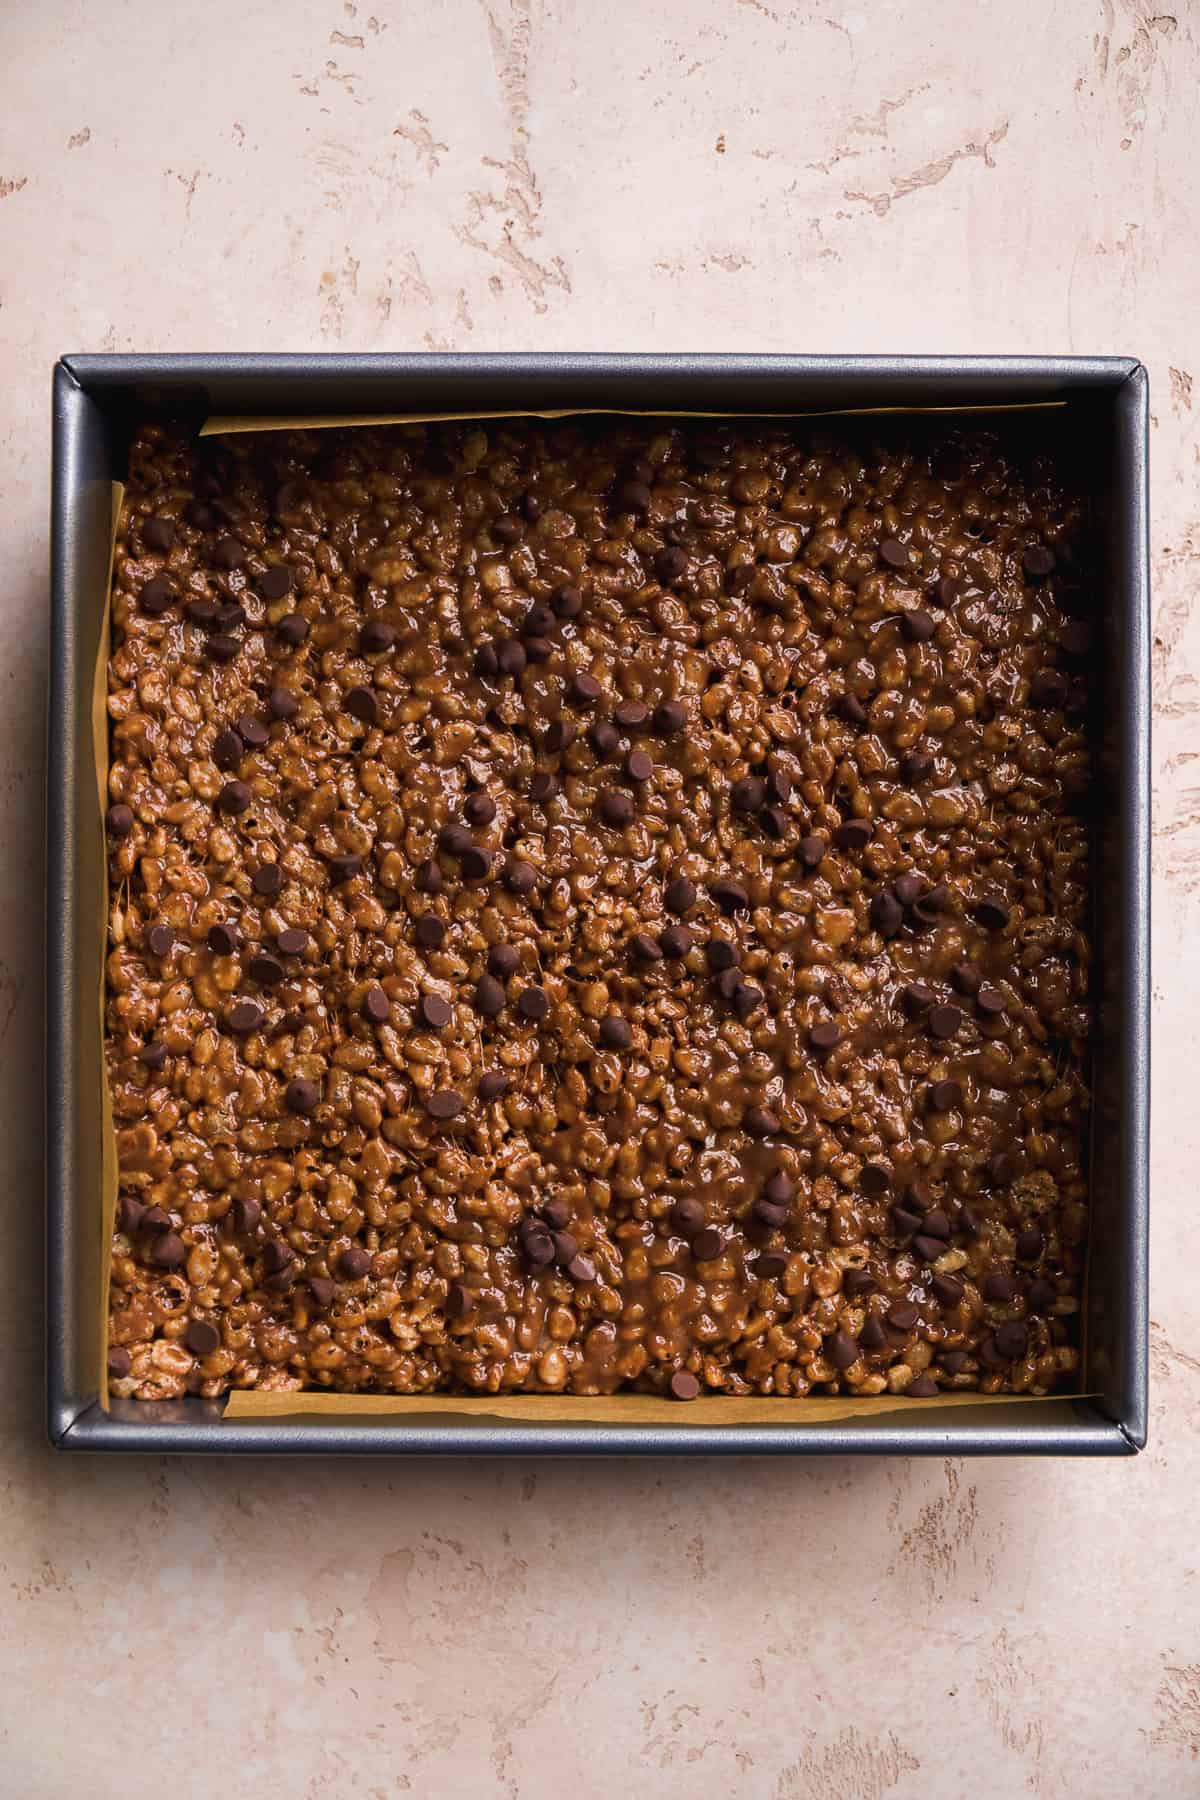 Square pan with chocolate rice krispies and chocolate chips on top.